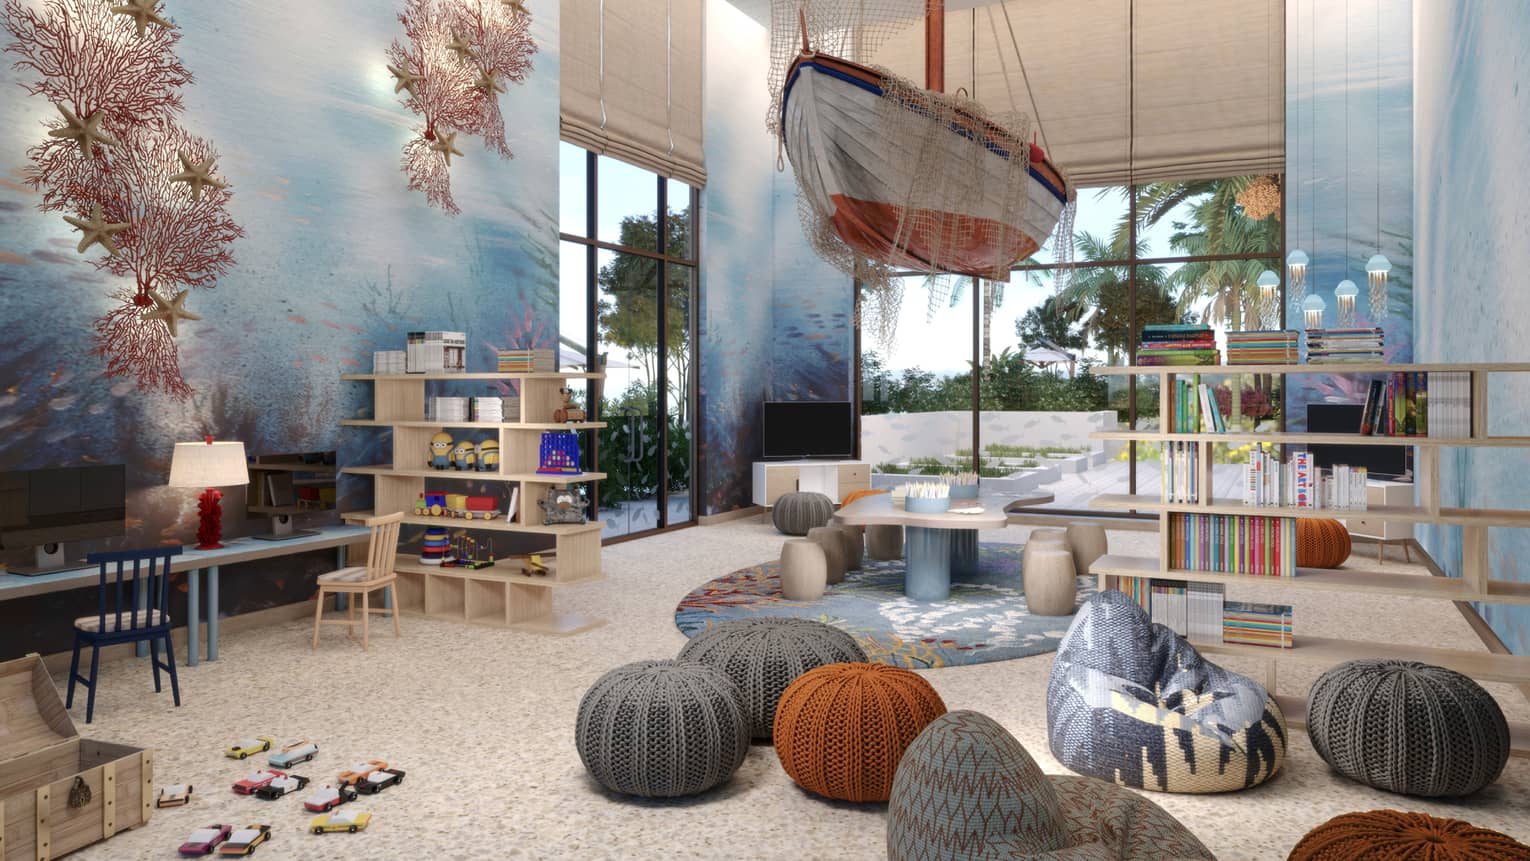 Kids play room with small knit stools, a ship hanging from the ceiling, and underwater mural on the wall